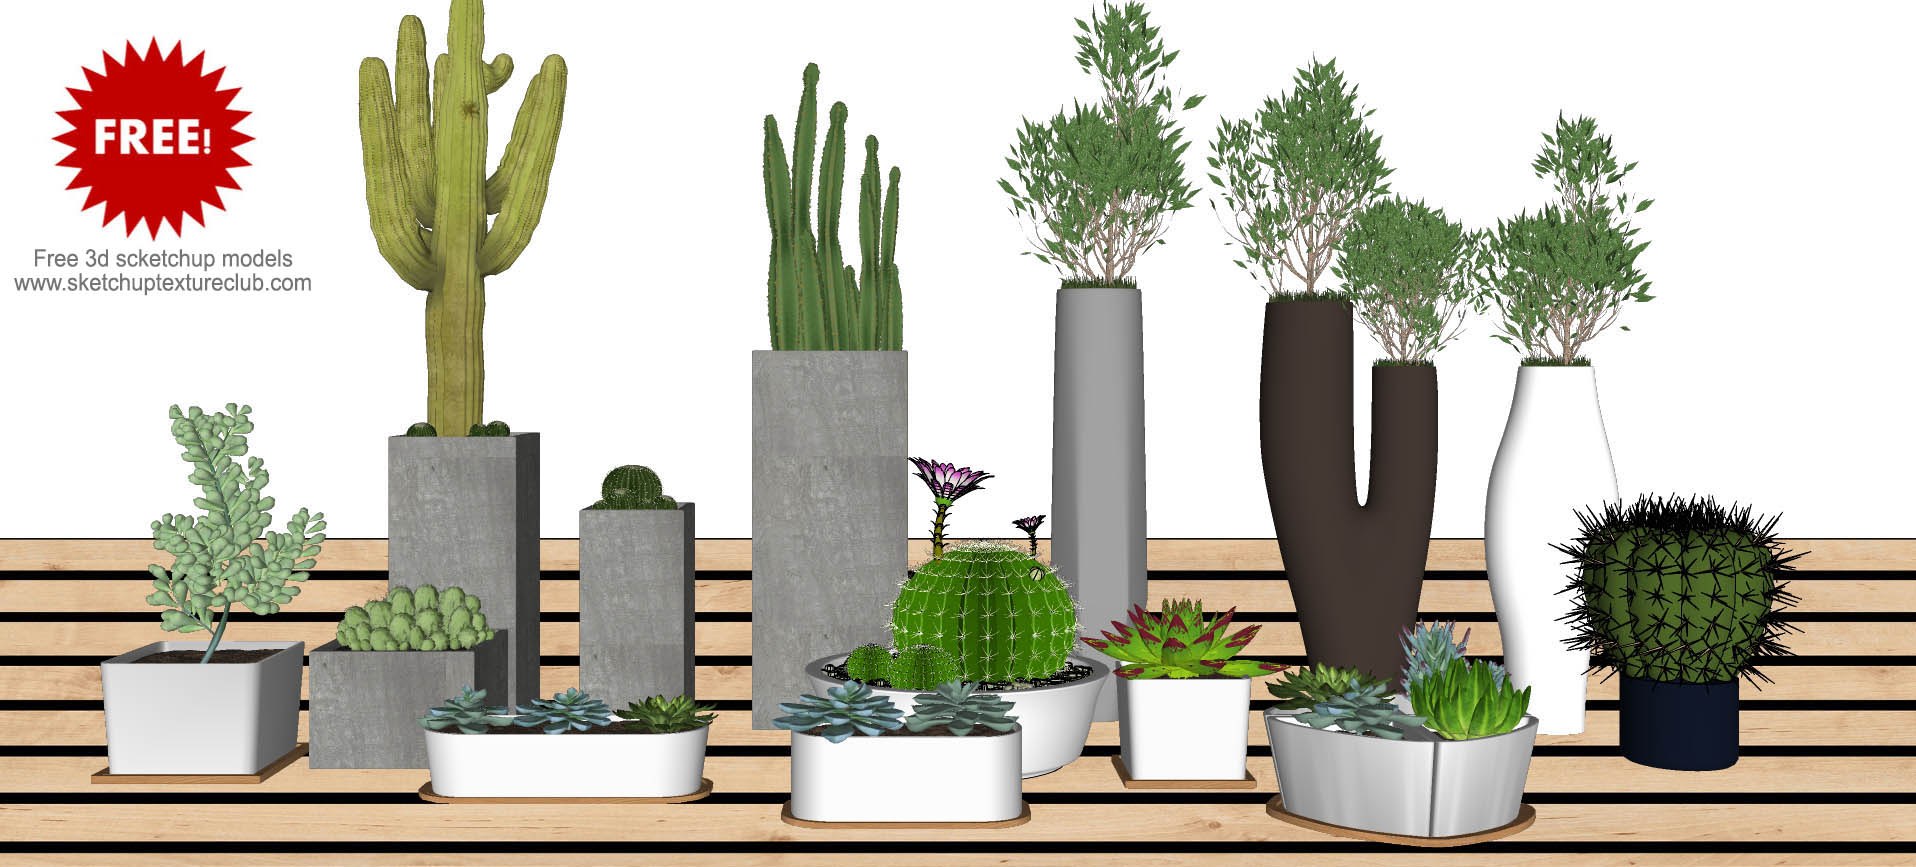 14 SketchUp 3D plants in pots collection #2